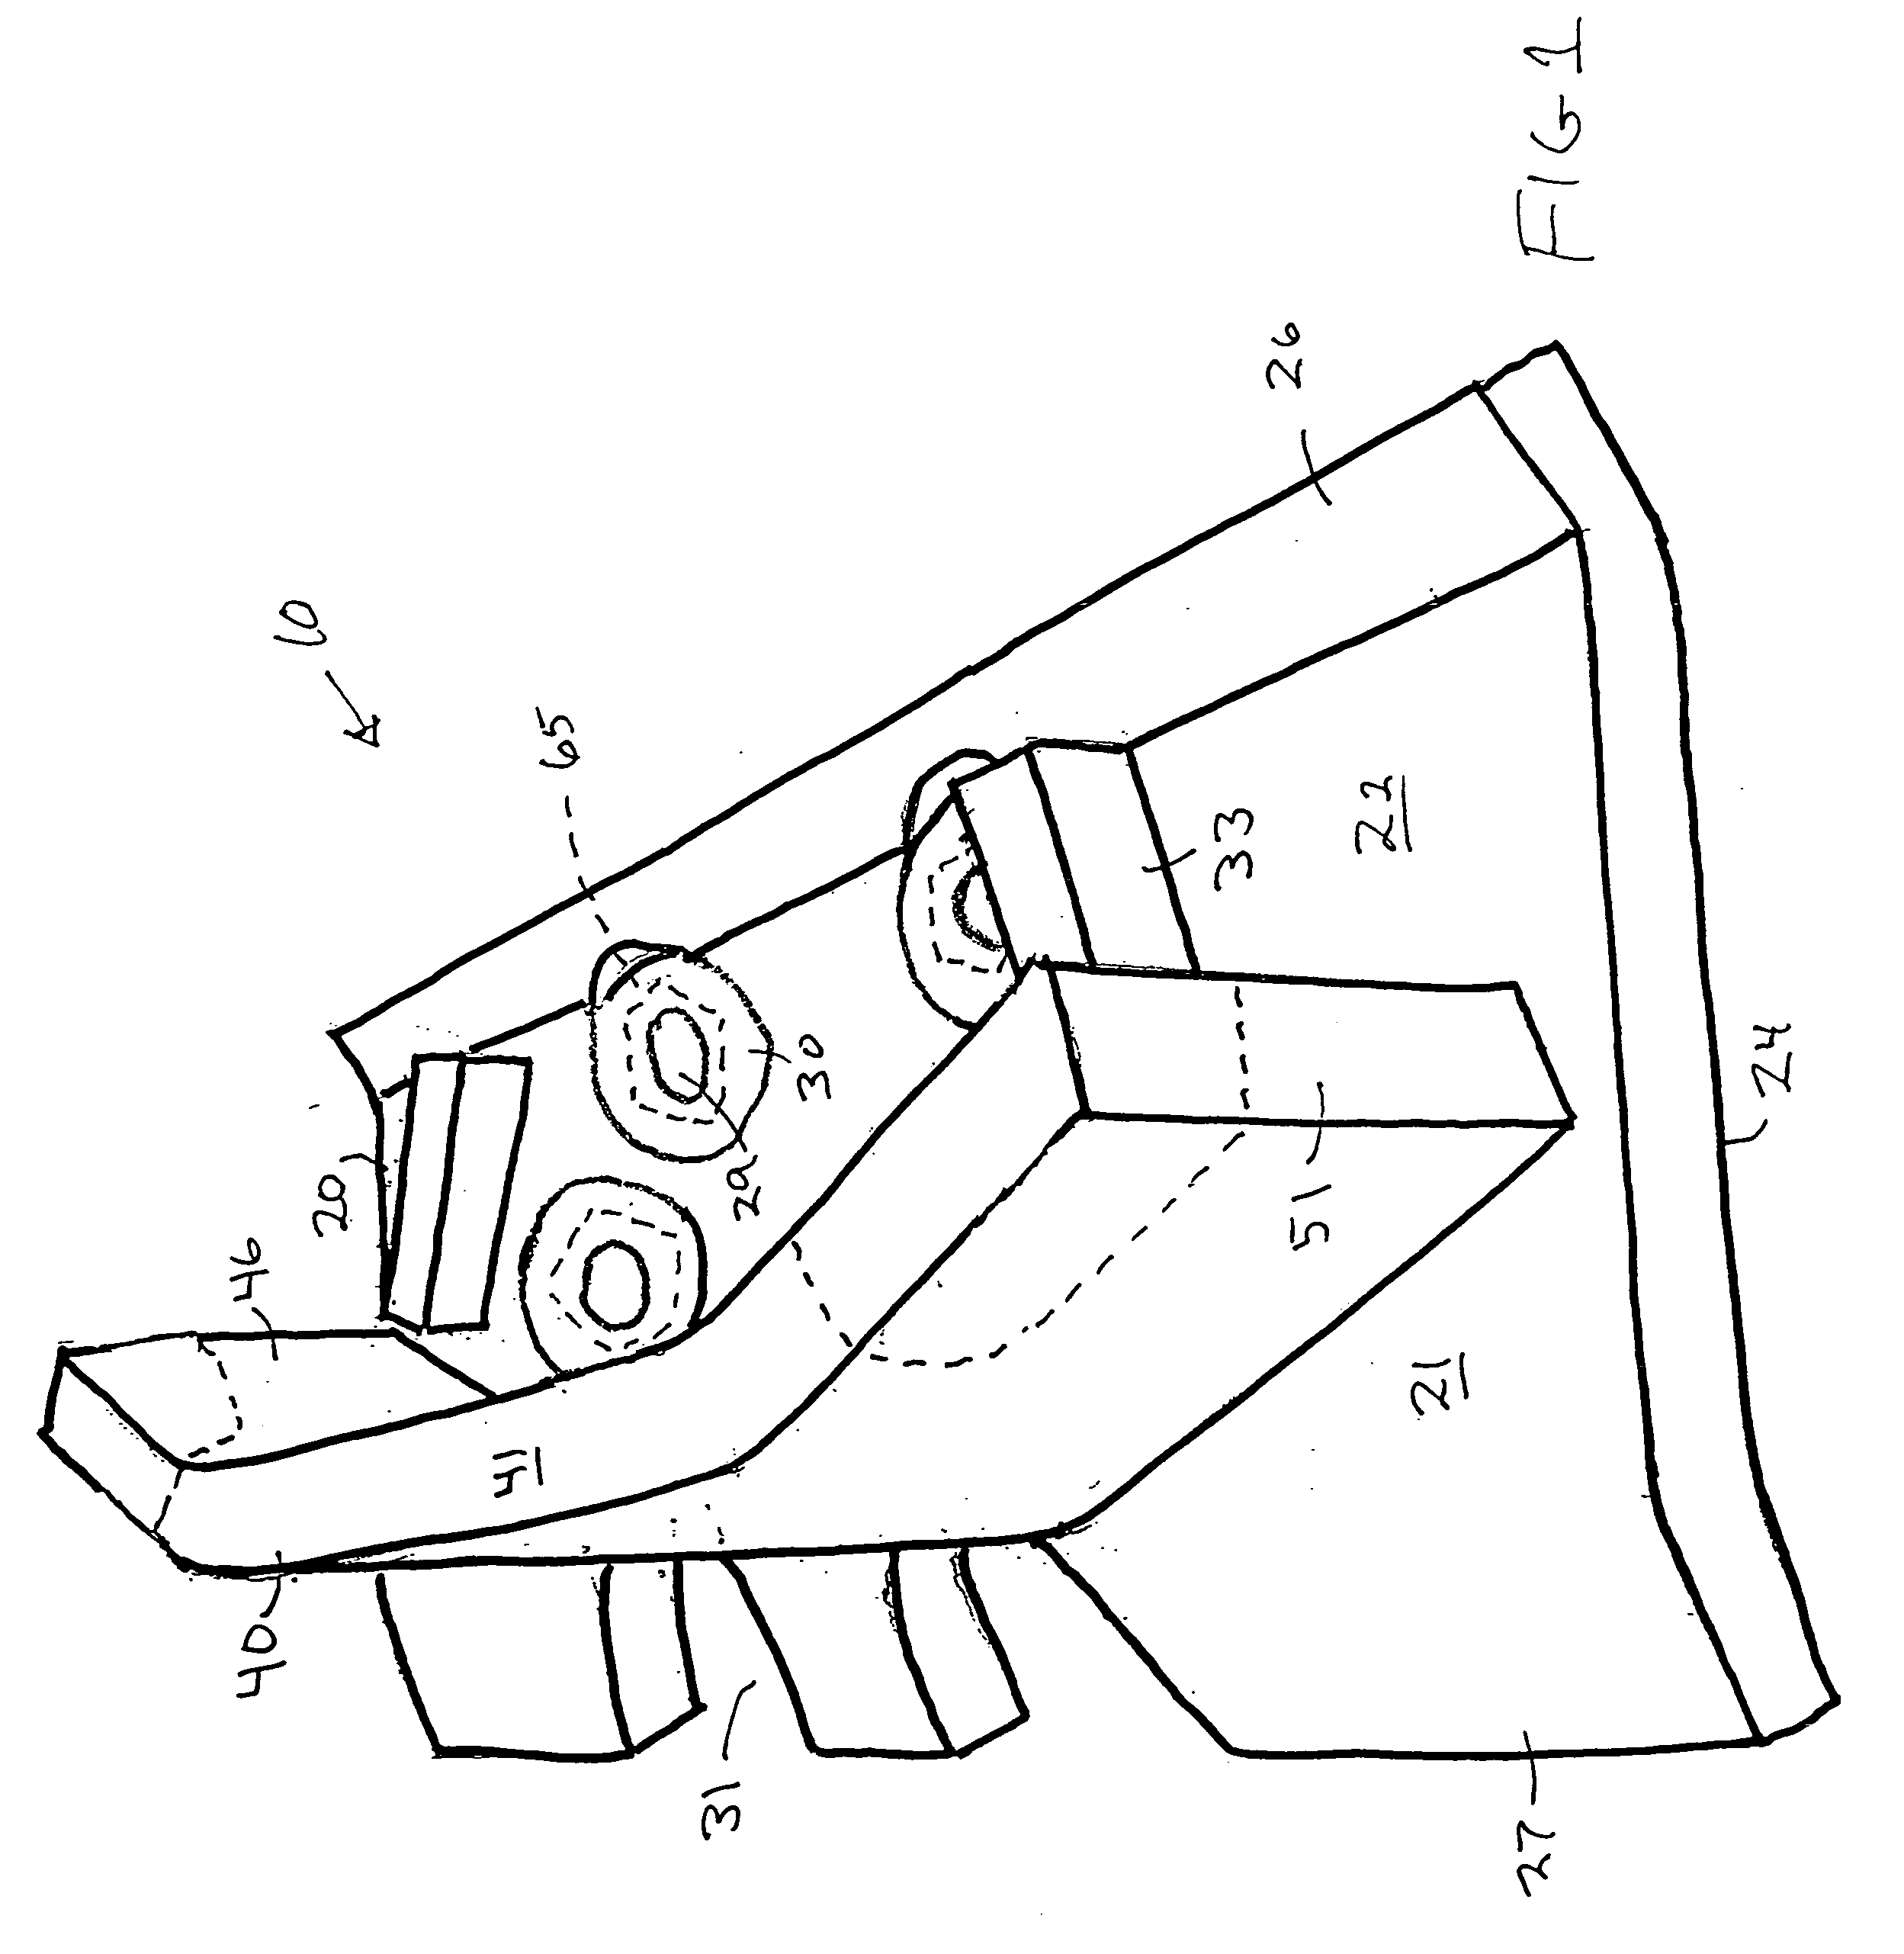 Grouser shoe and fabrication method